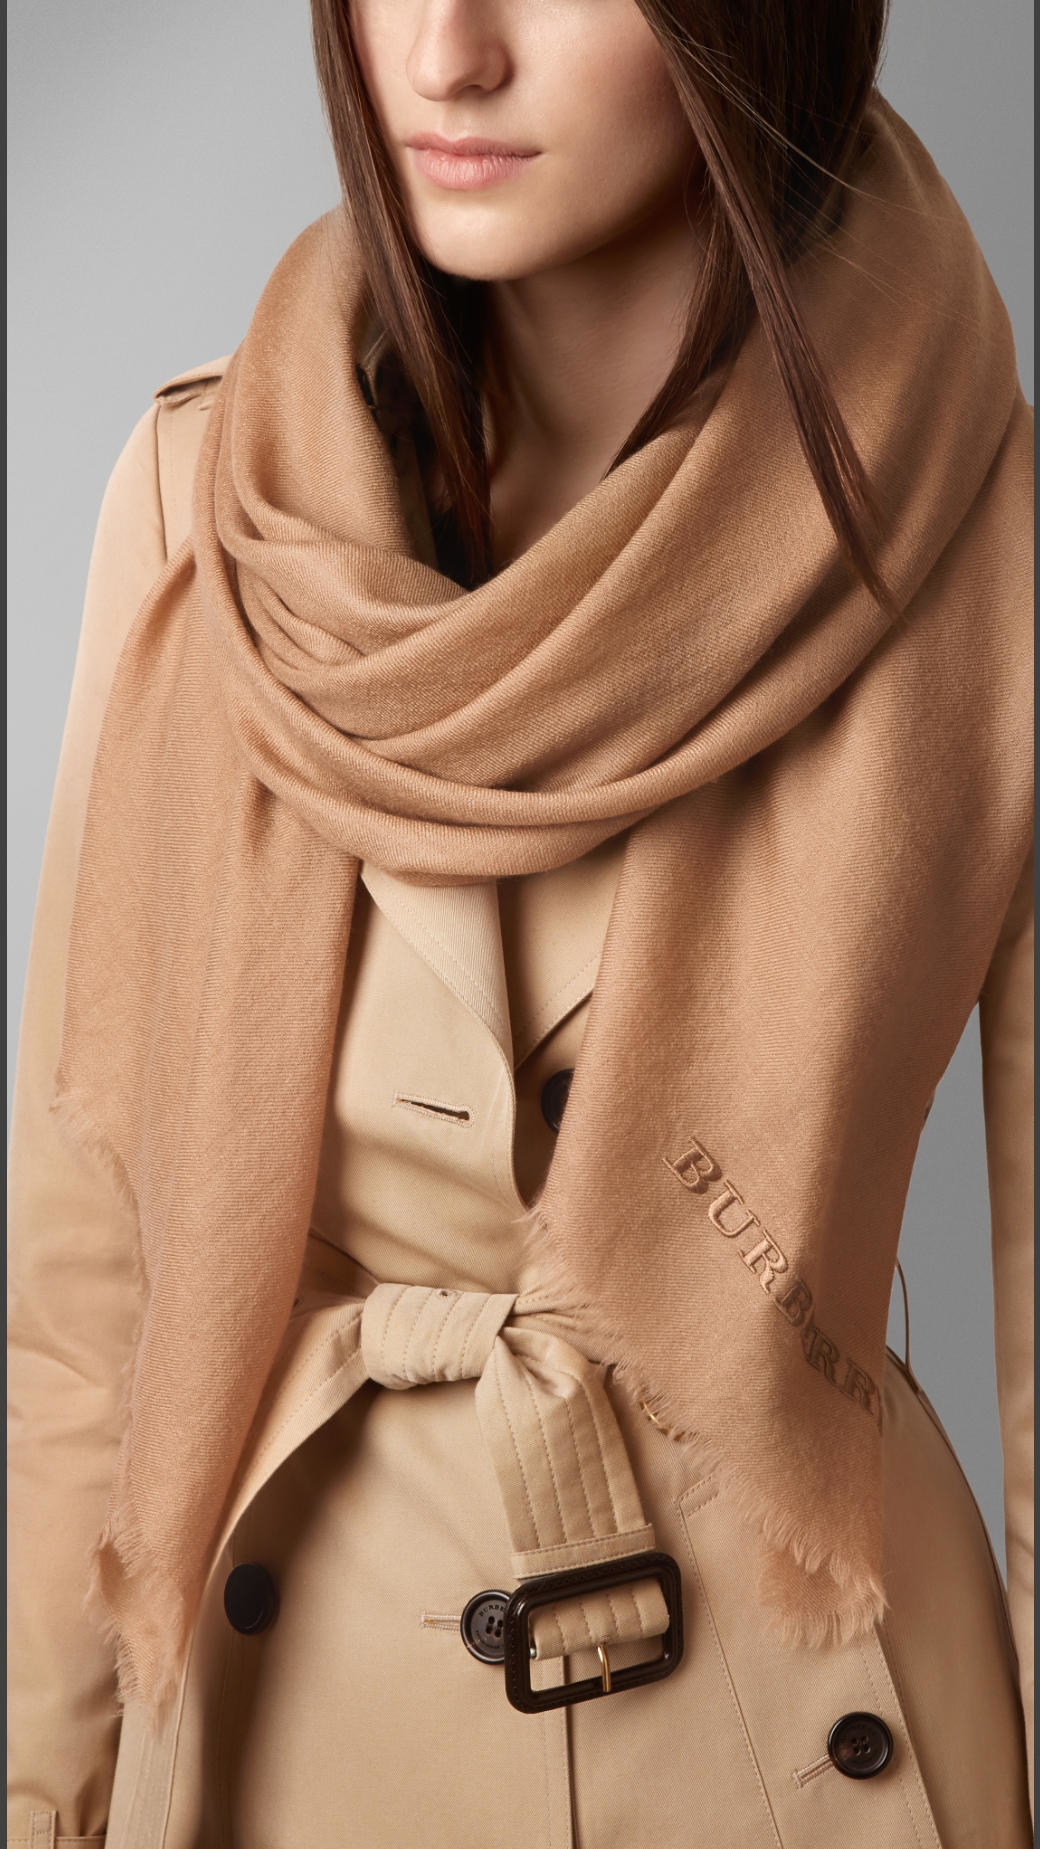 Burberry Embroidered Lightweight Cashmere Scarf in Camel (Natural) - Lyst